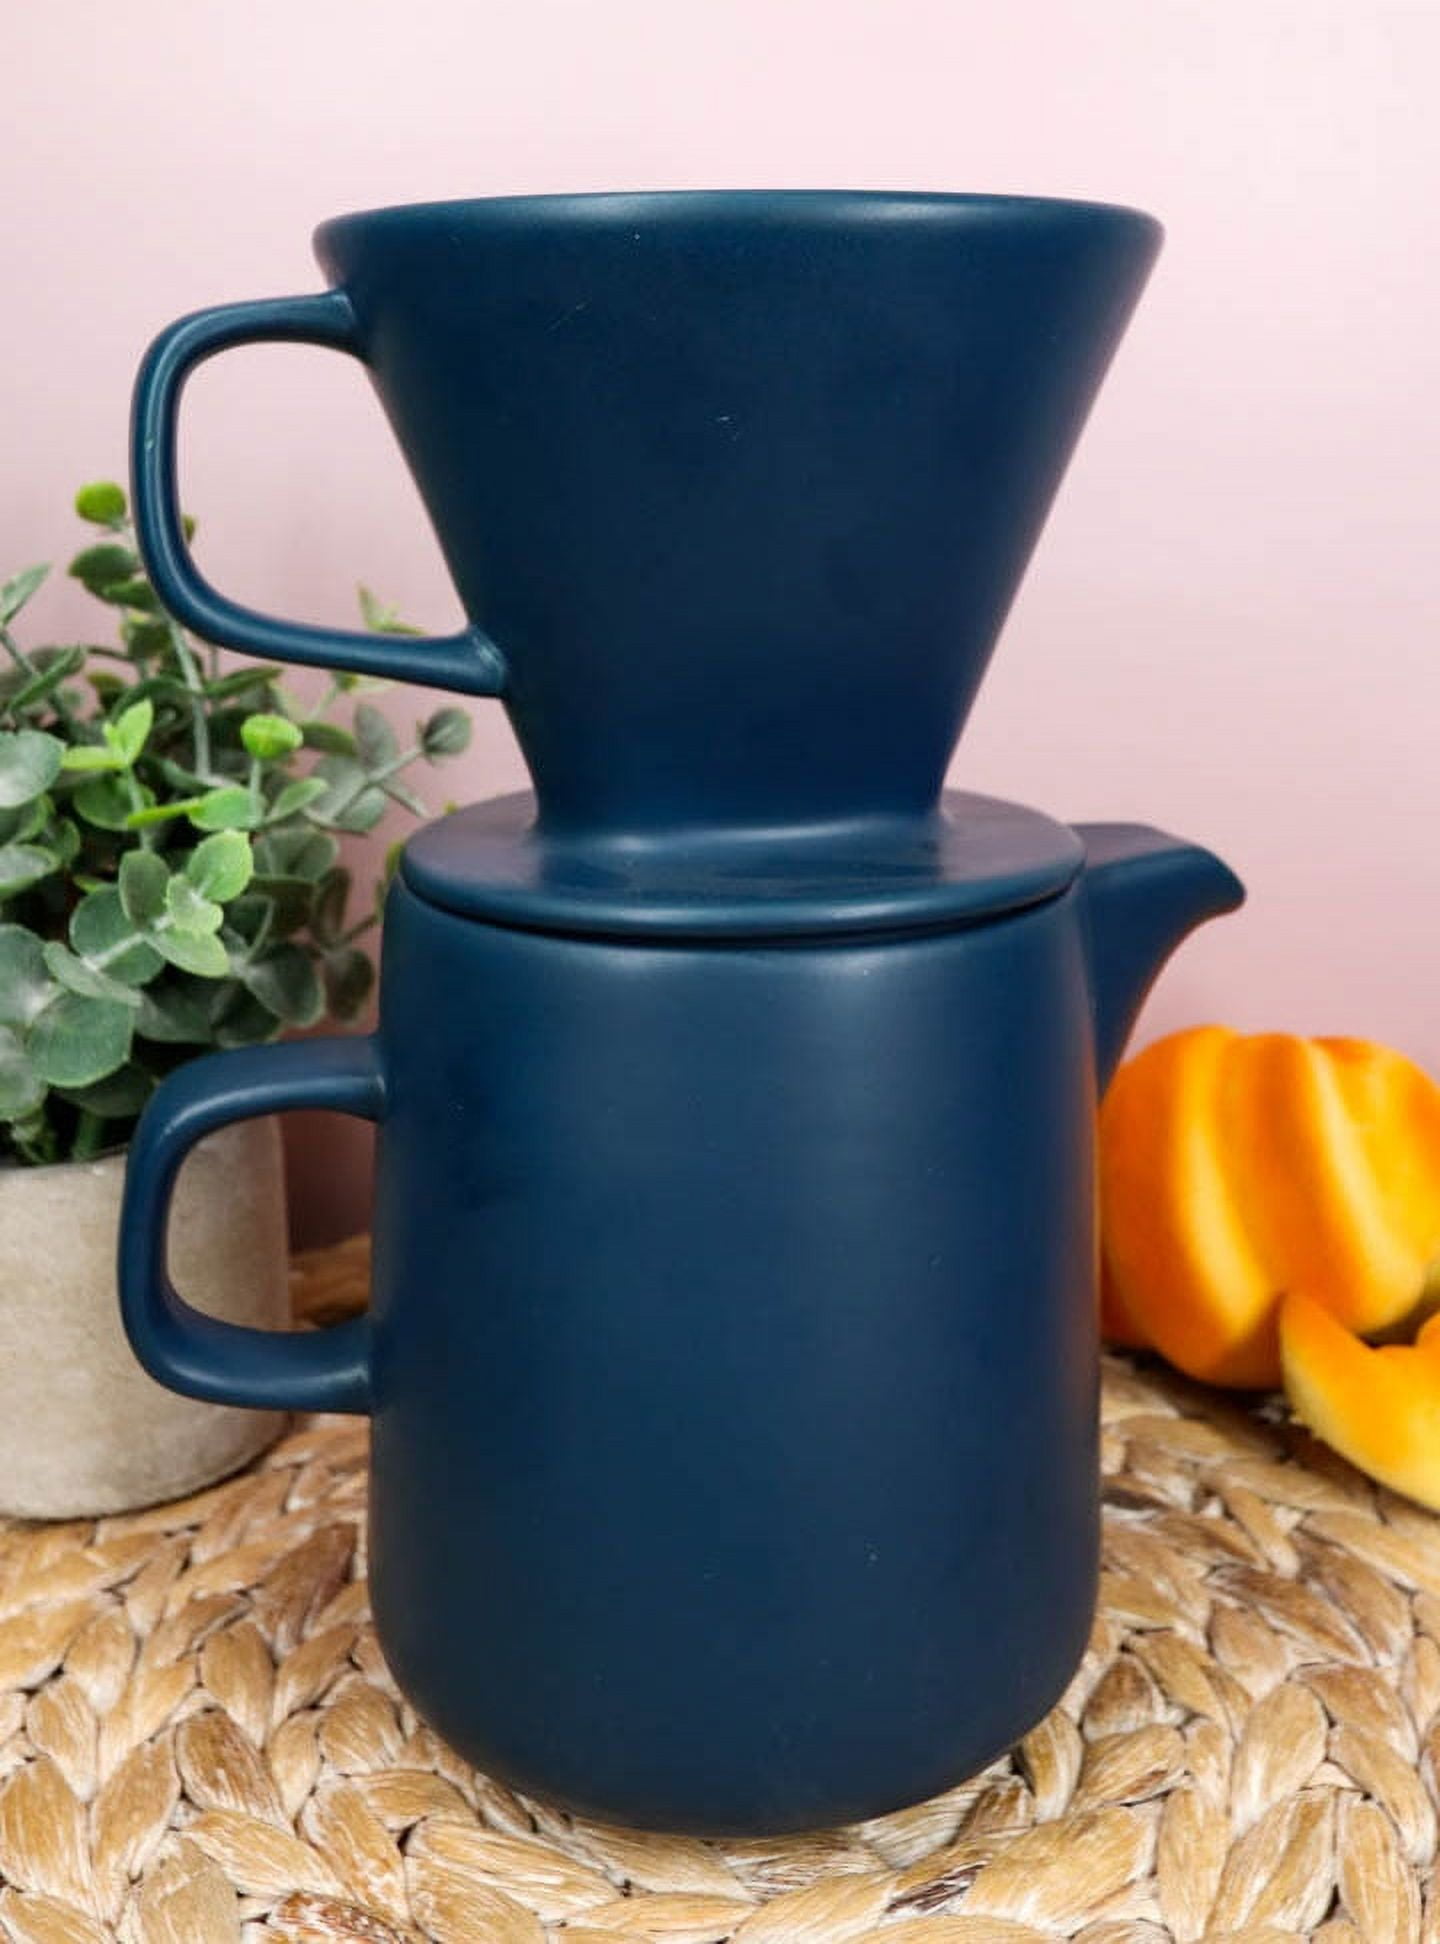 Pour-over Coffee Maker - 2 cups — peter pots pottery